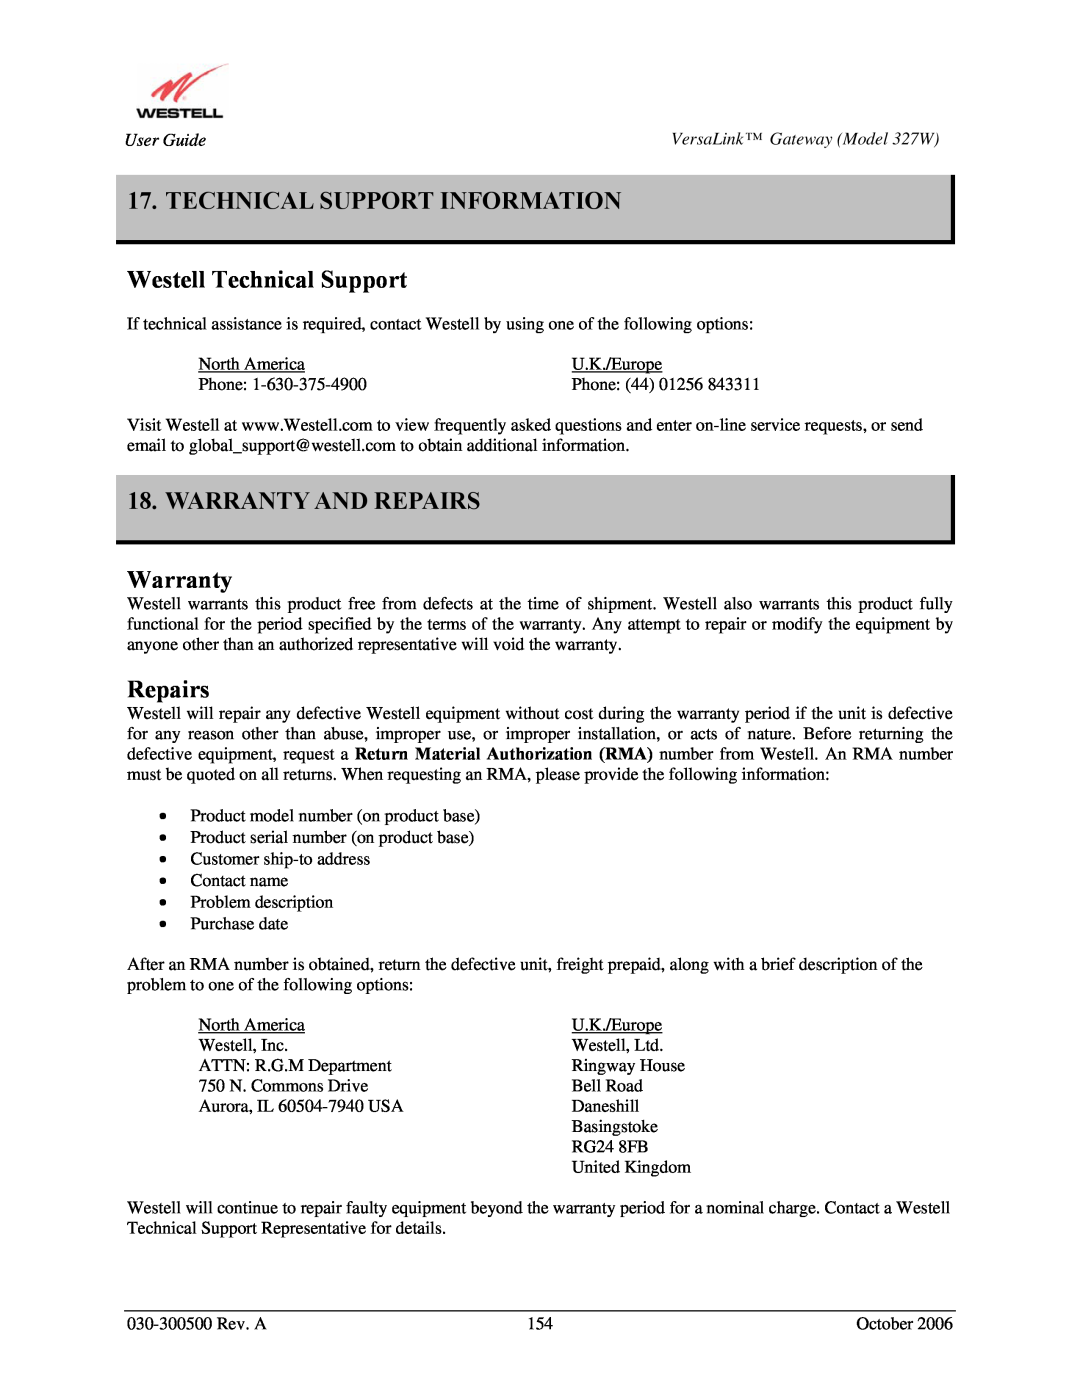 Westell Technologies 327W TECHNICAL SUPPORT INFORMATION Westell Technical Support, WARRANTY AND REPAIRS Warranty, Repairs 